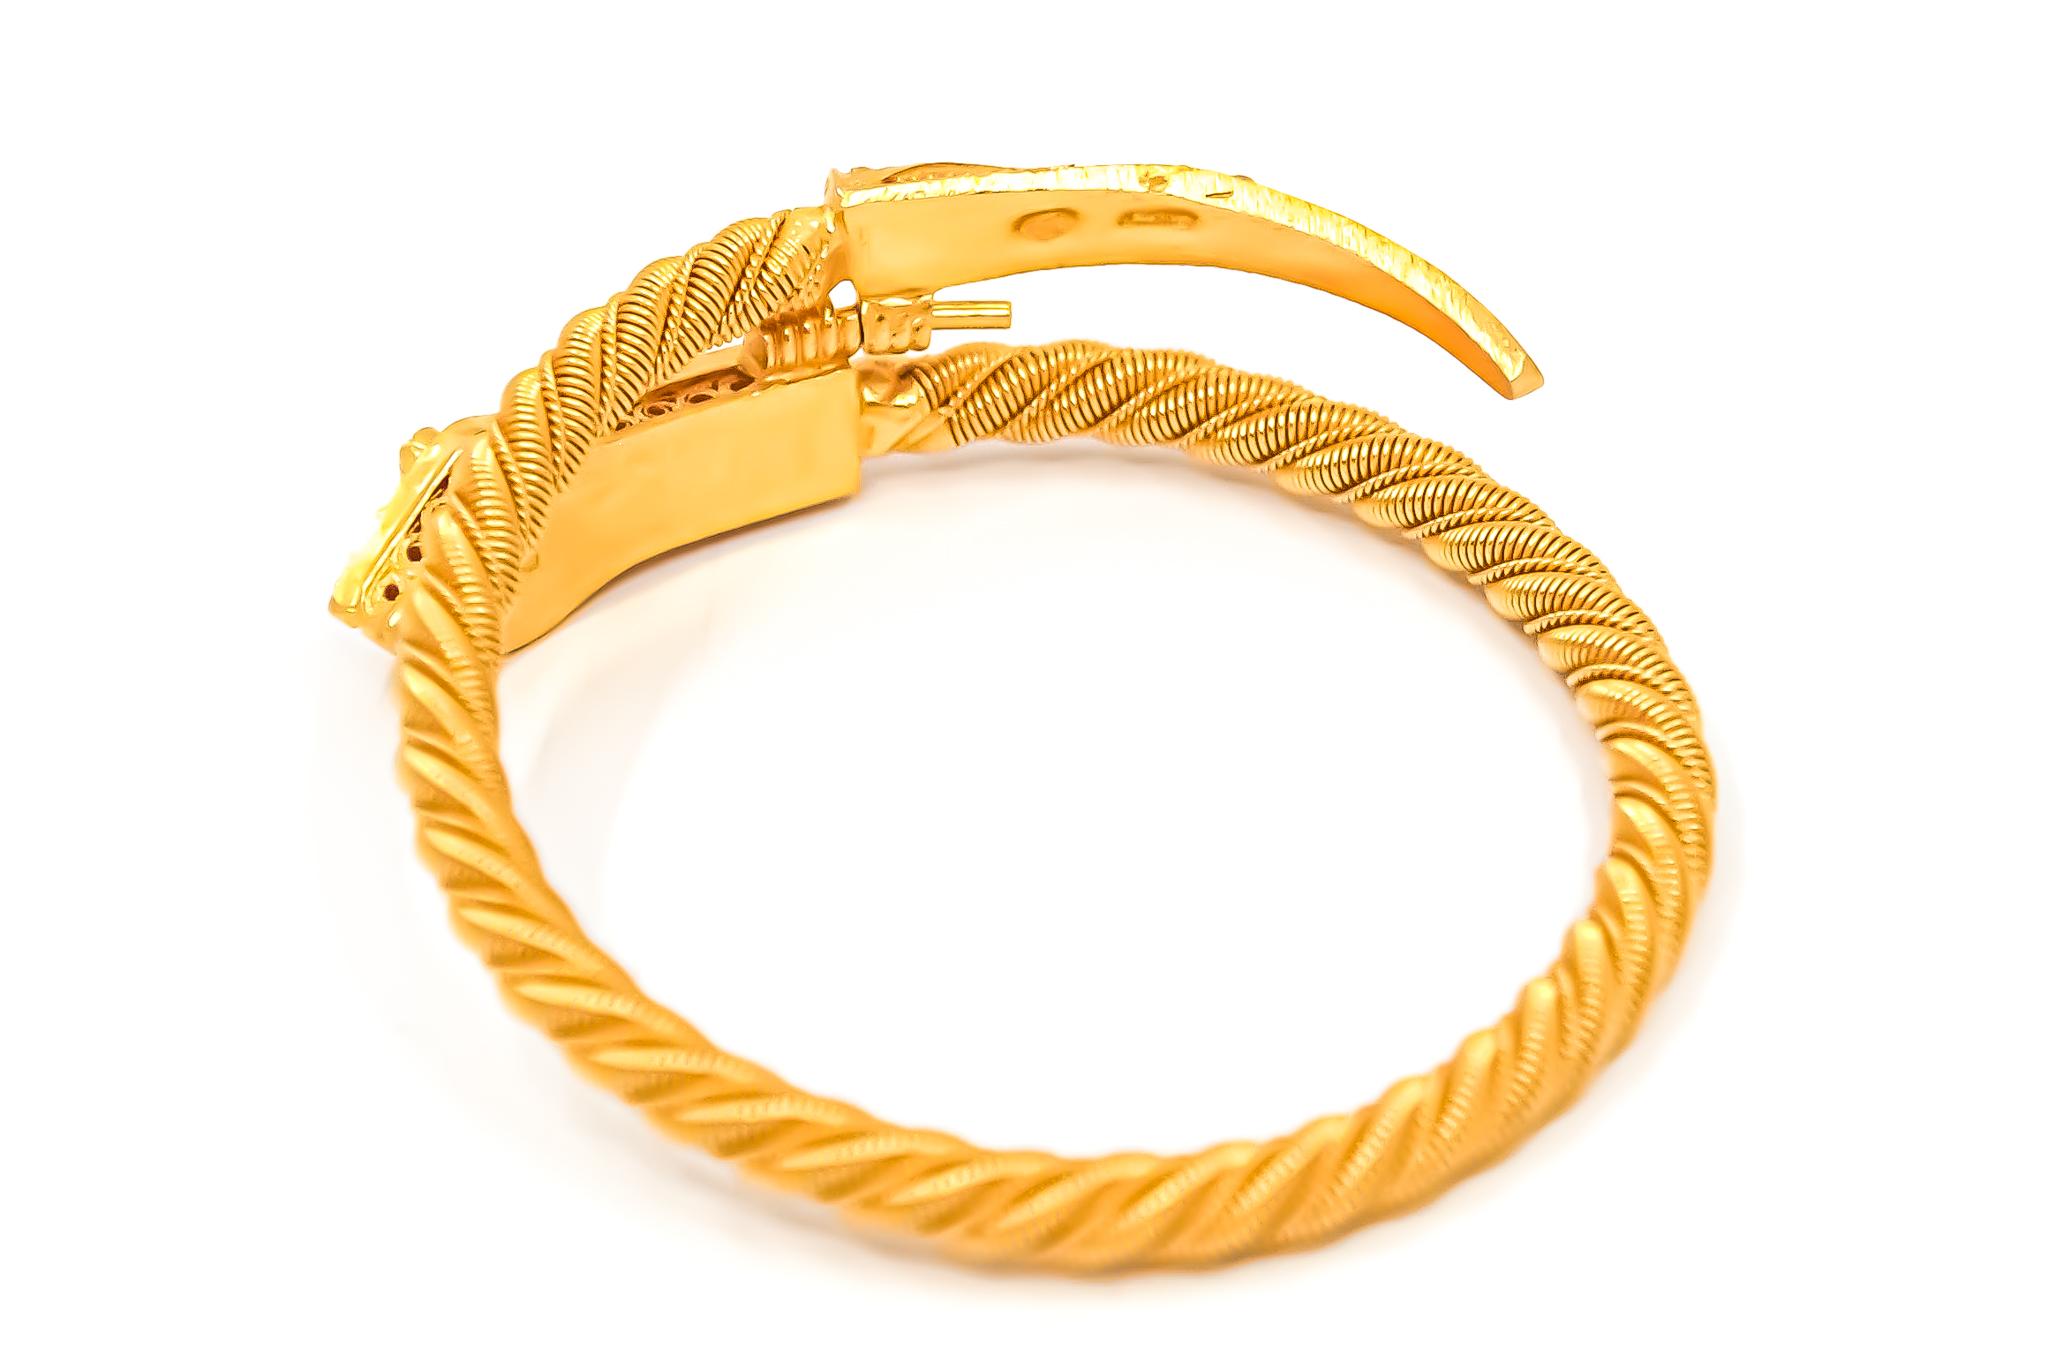 Vintage Serpenti Cuff Bracelet made in 21 Karat Solid Yellow Gold and dates back to early 1960s. The eyes of the serpenti are semi-precious stones with round cut. This piece was worn on very few occasions and has been kept untouched in a bank safe